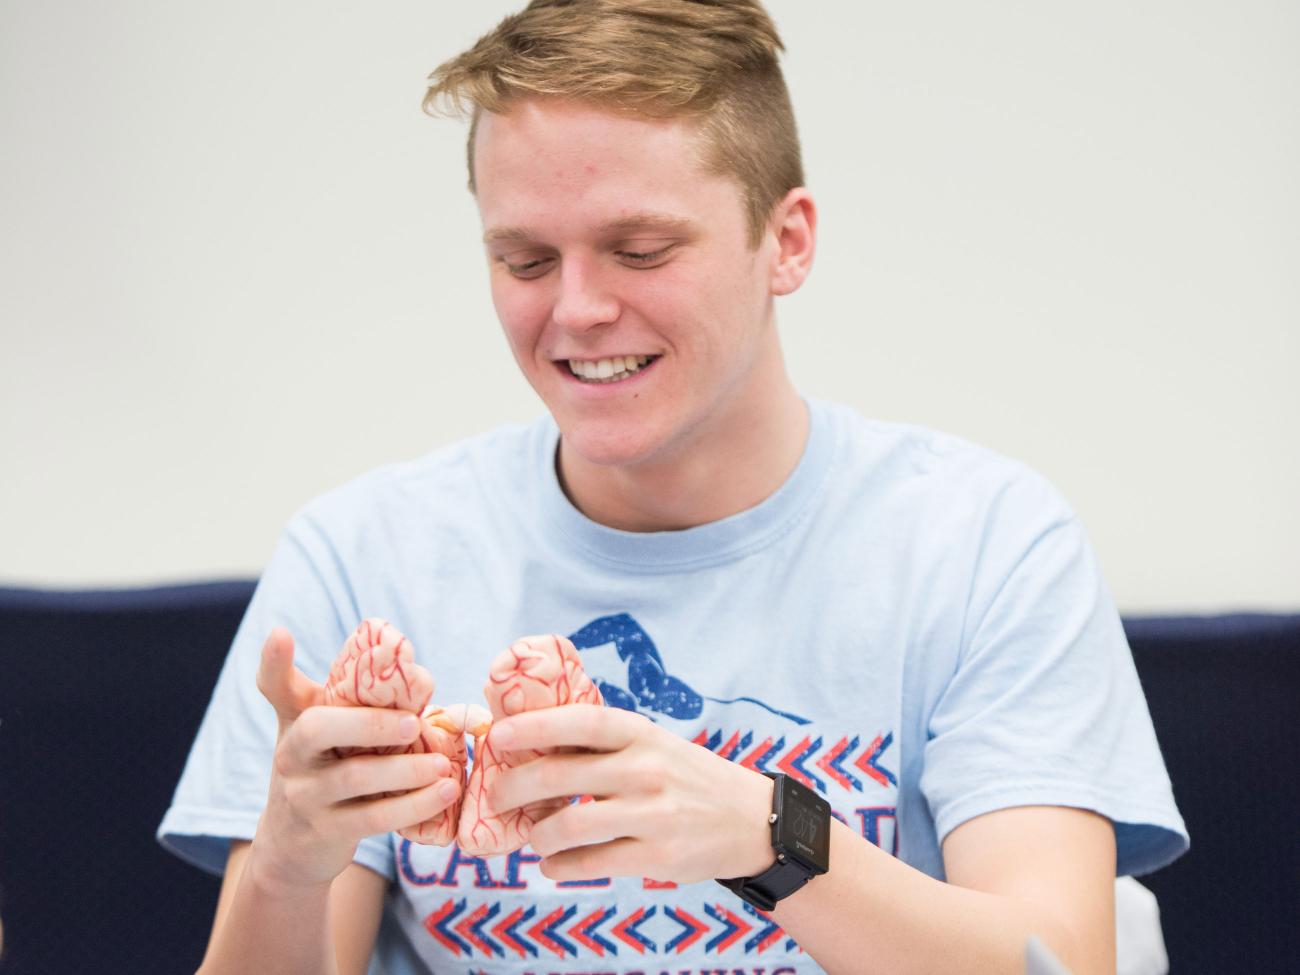 A student looks at a brain prop during a class meeting.